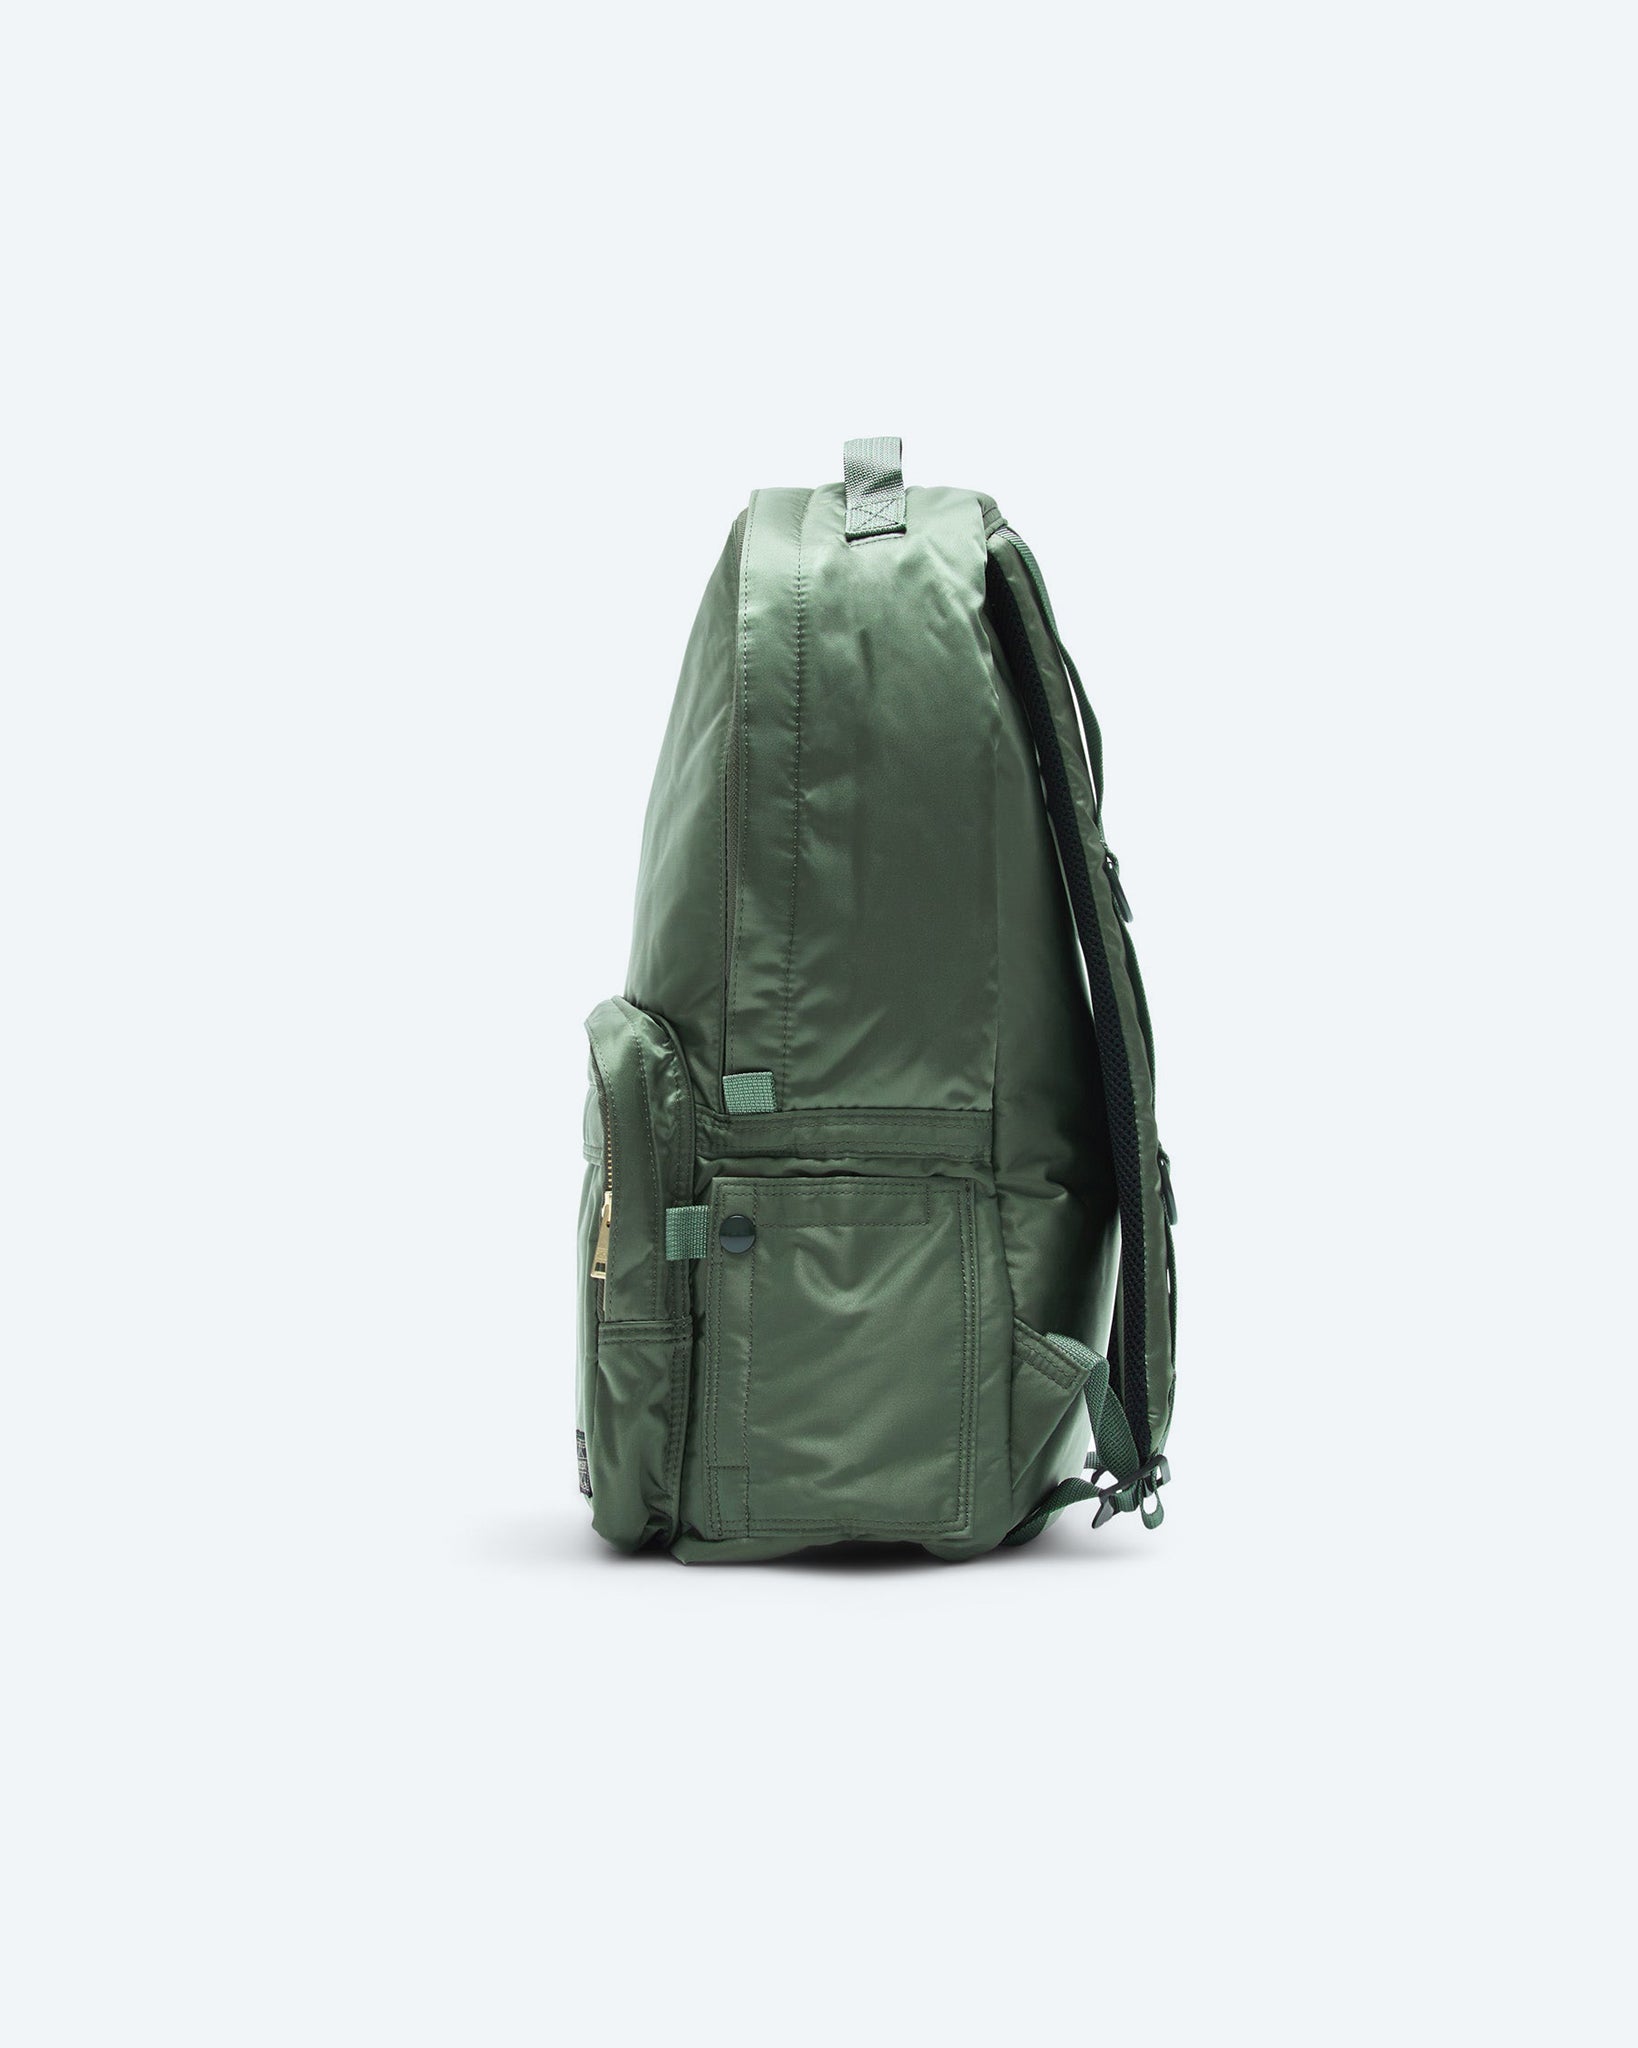 Porter Day Pack | Reigning Champ